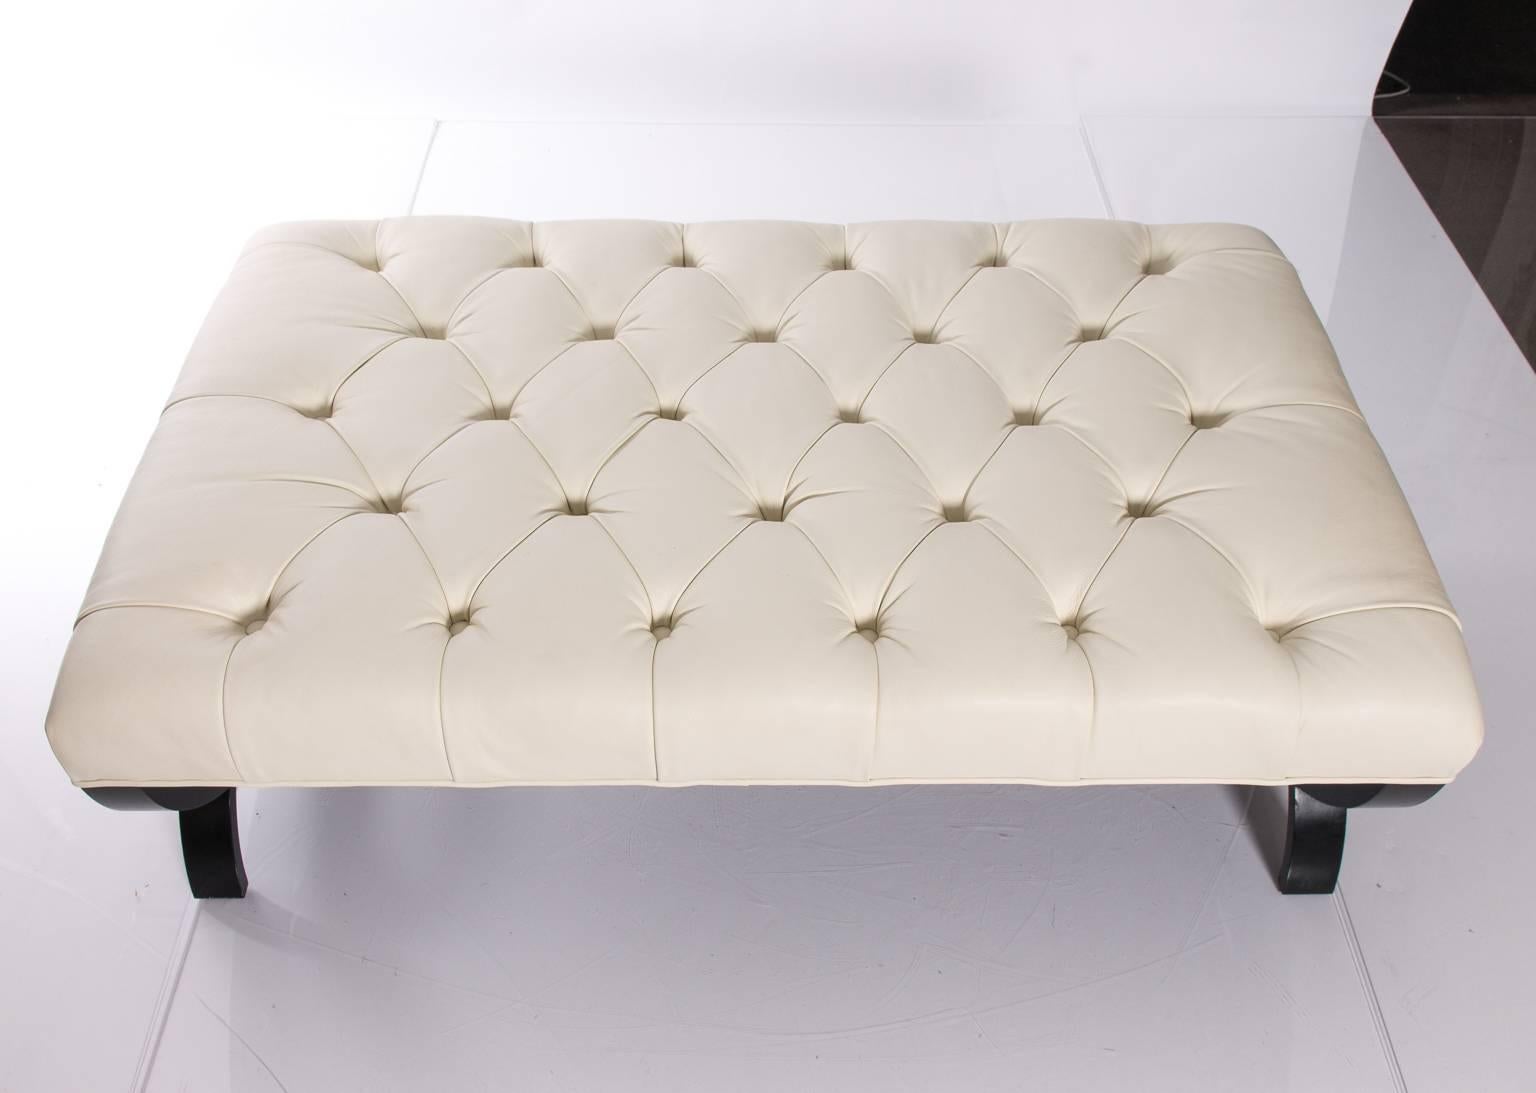 Tufted white leather ottoman by Thomas Pheasant for Baker. Solid wood base. Several minor scratches on the base.